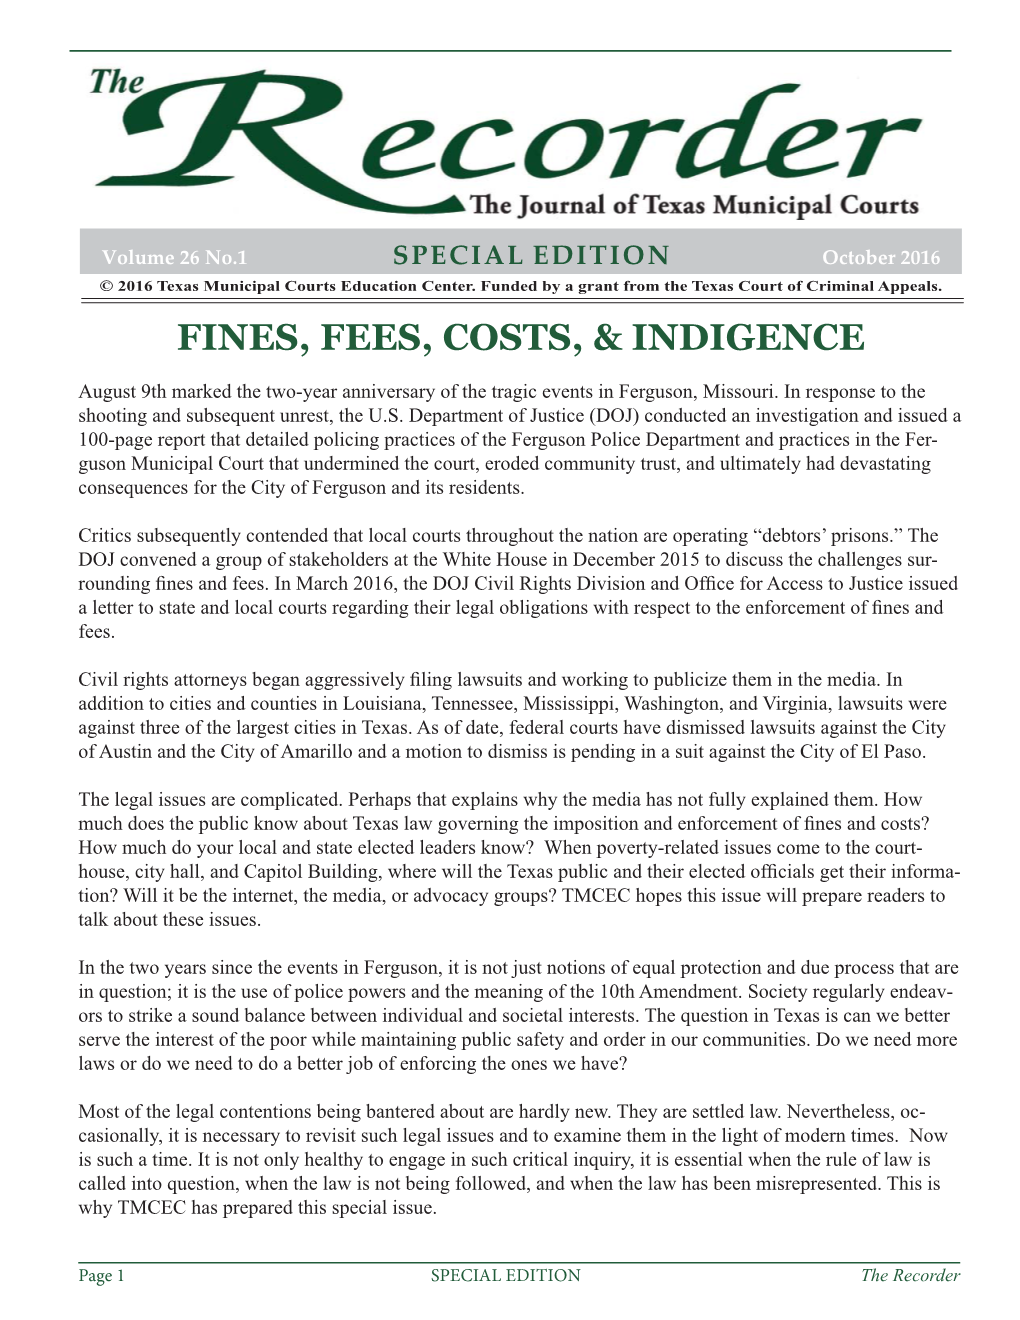 Special Edition: Fines, Fees, Costs, & Indigence